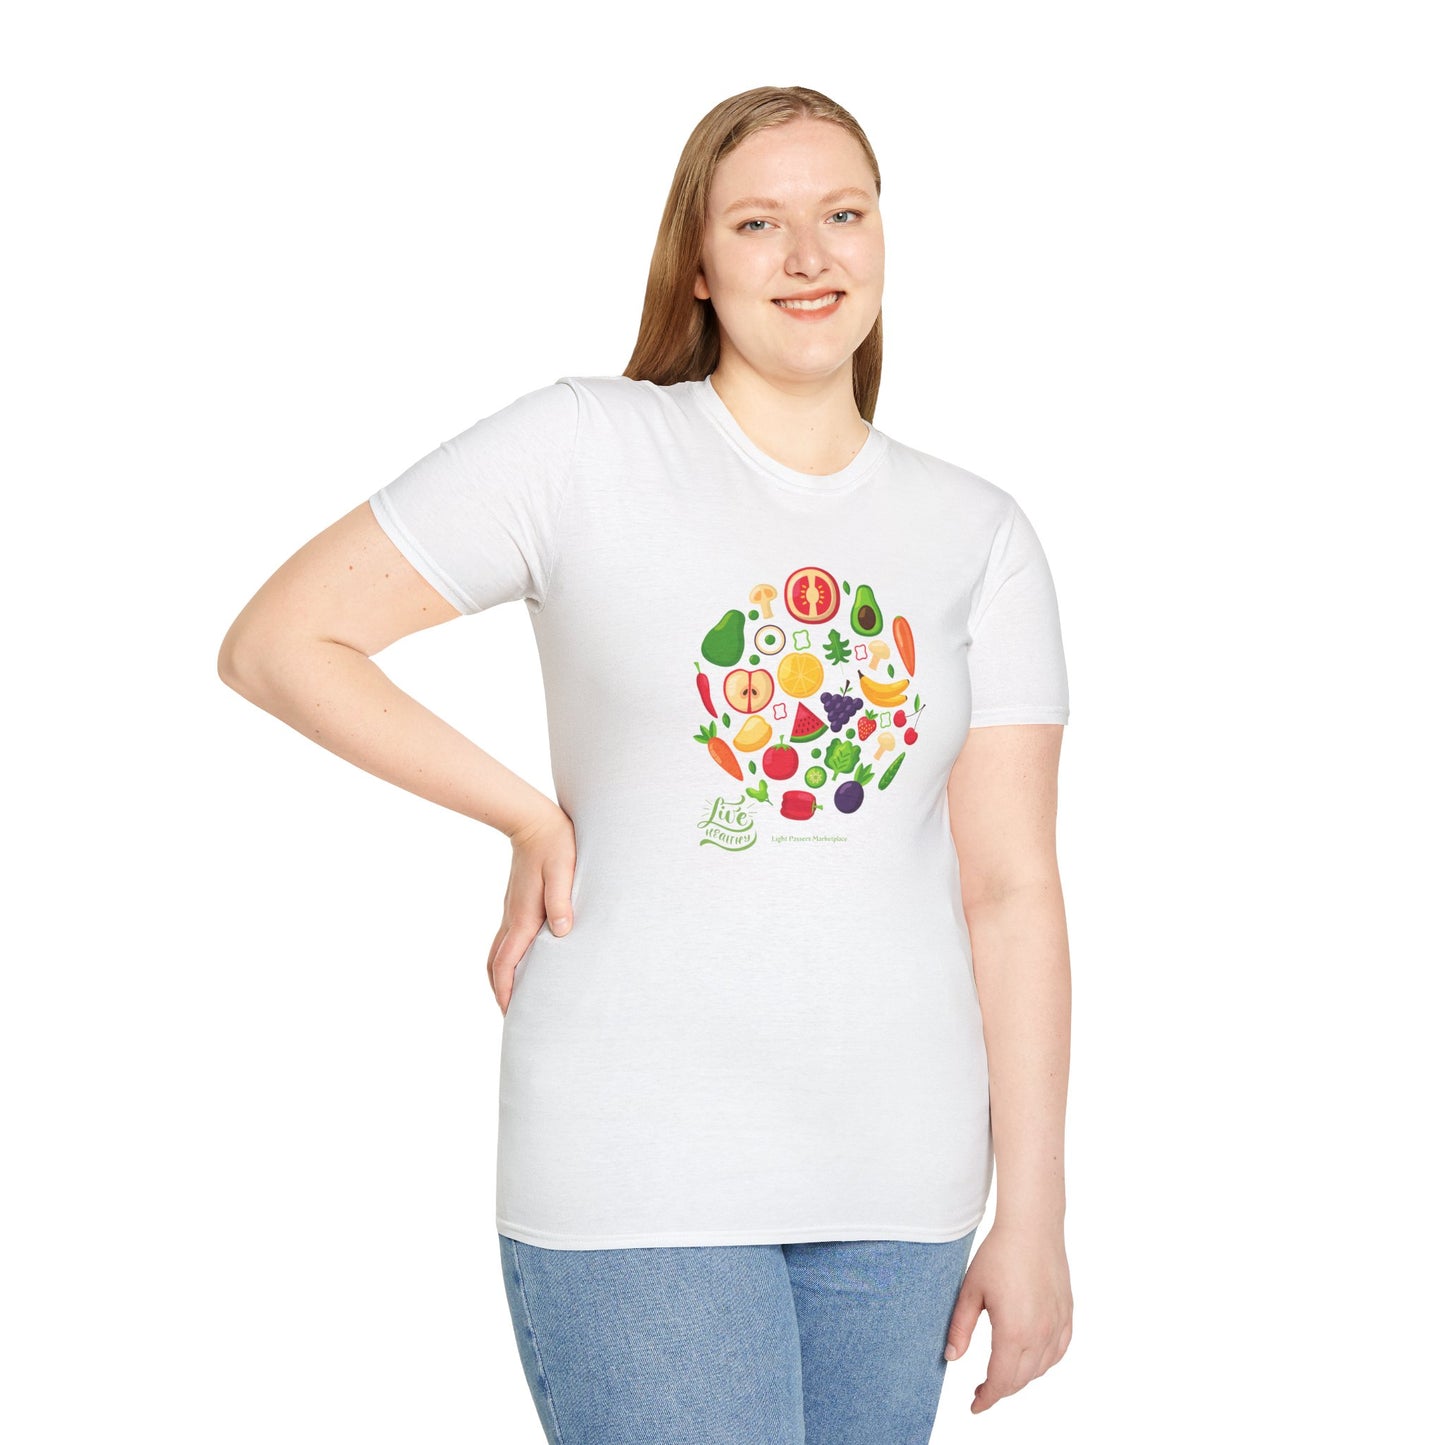 A woman in a white shirt with a fruit design, smiling, showcasing the Live Healthy Unisex T-Shirt. Close-up of jeans and fruits complement the casual, comfortable 100% cotton tee with twill tape shoulders for durability.